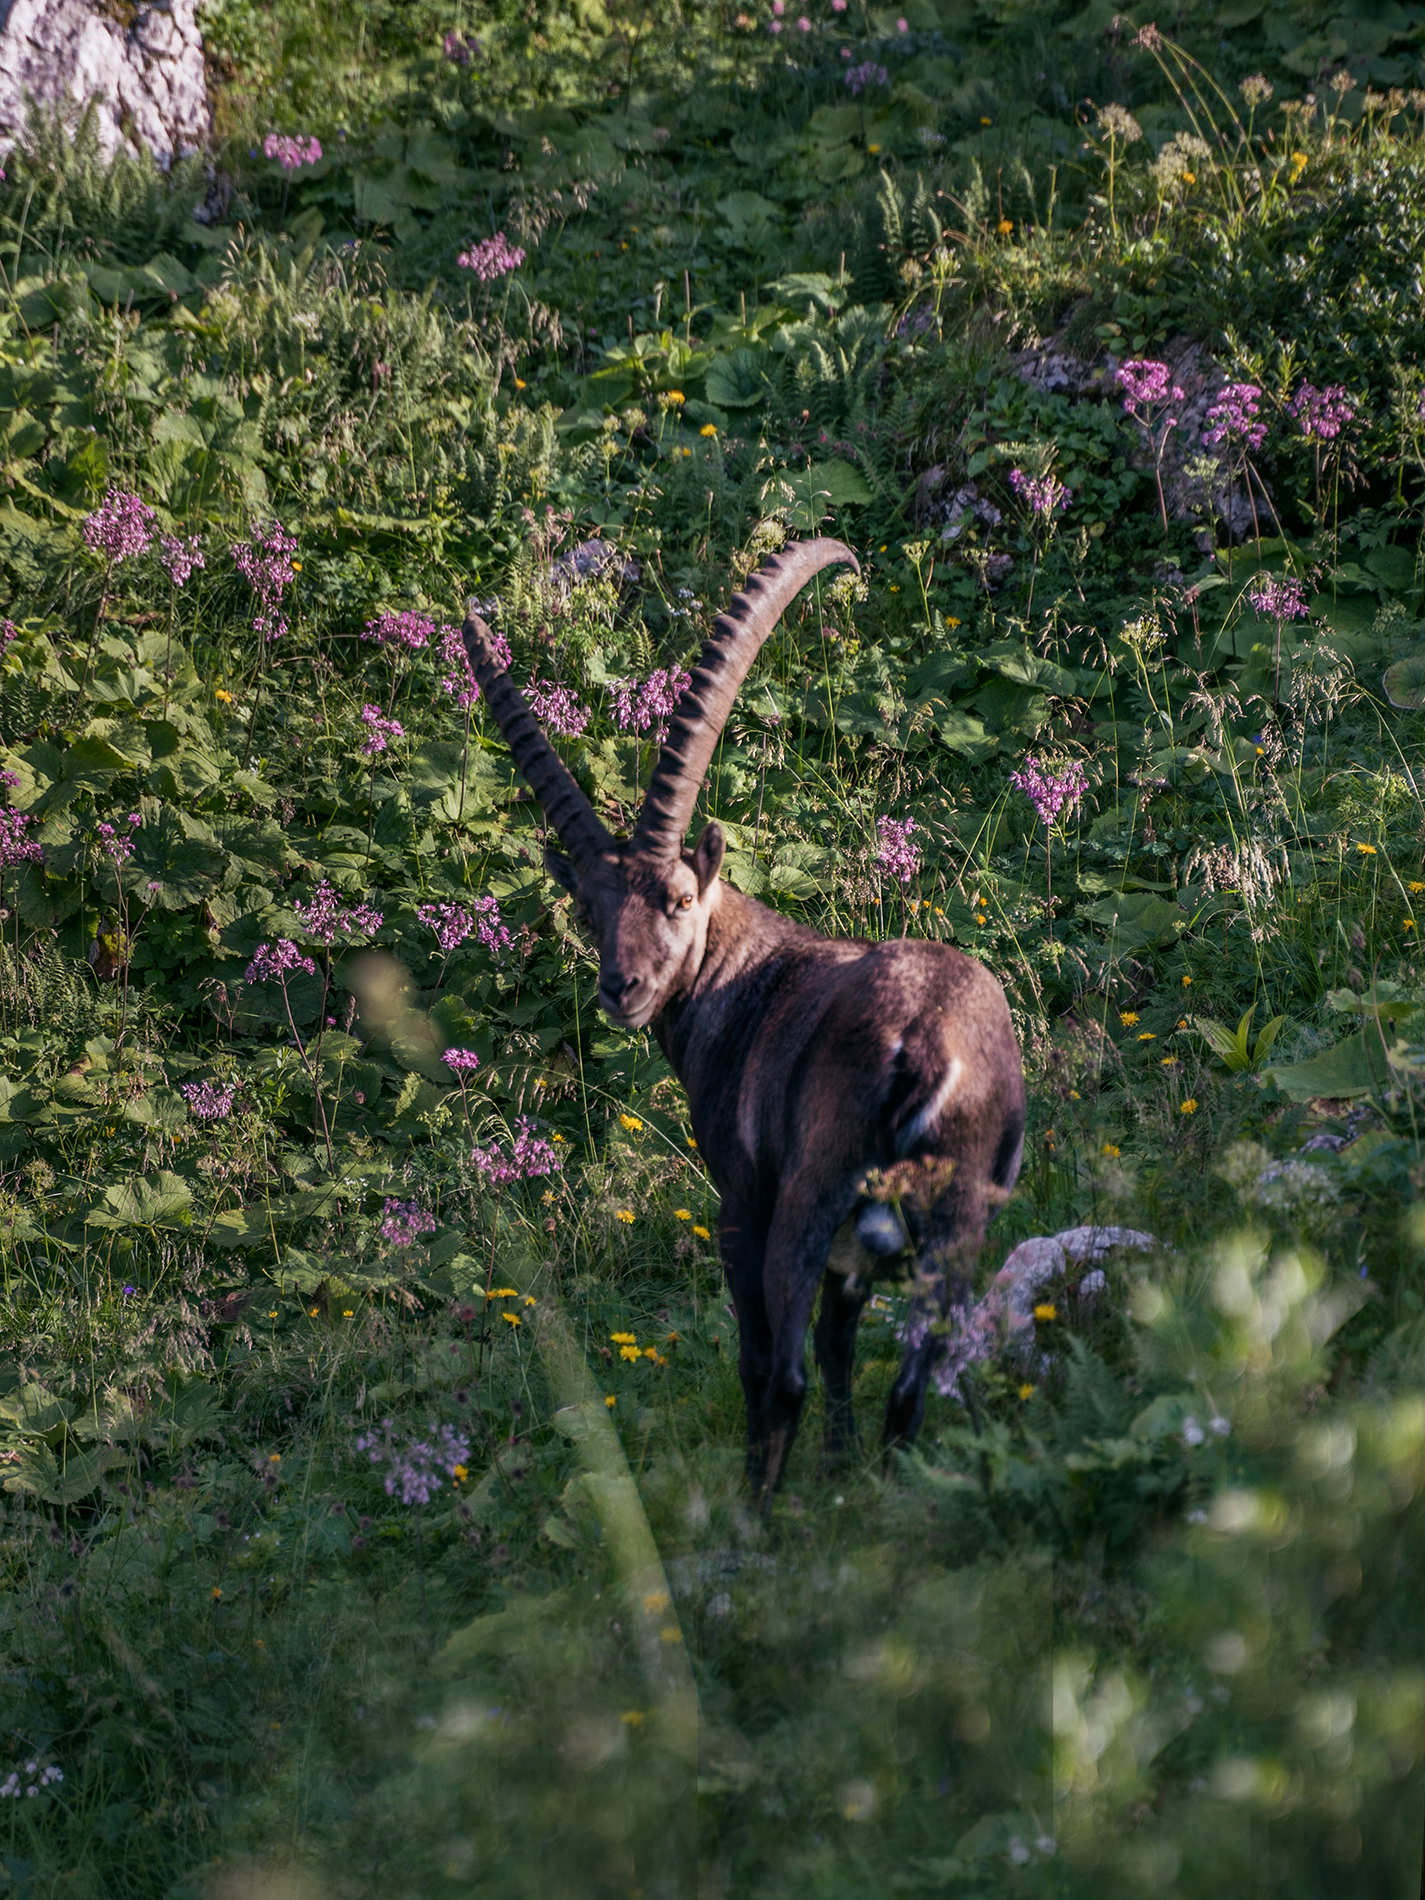 A mountain ibex surrounded by purple flowers.